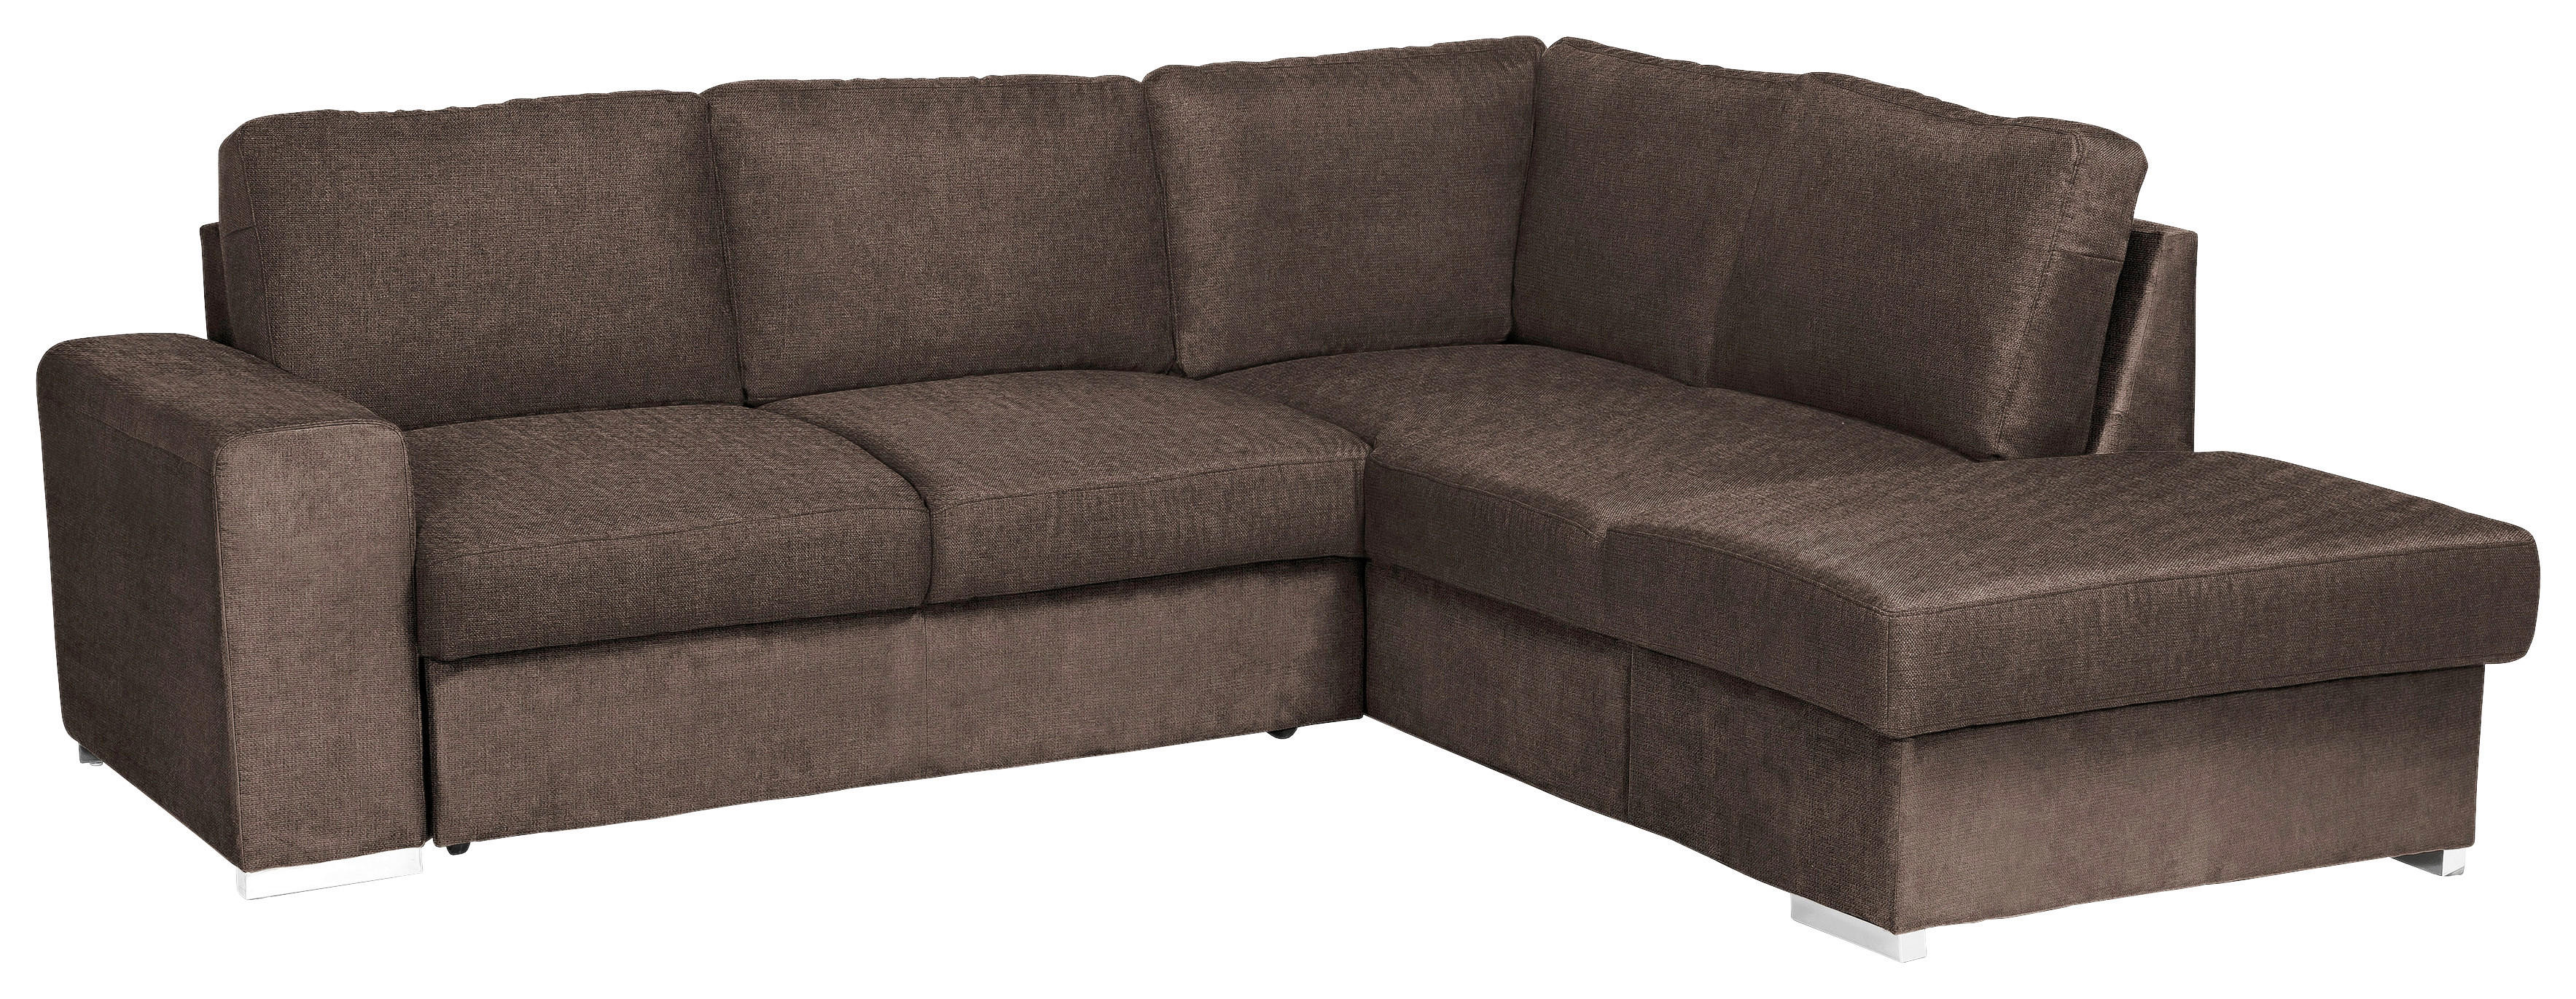 ECKSOFA in Mikrofaser Taupe  - Taupe/Chromfarben, KONVENTIONELL, Textil/Metall (248/213cm) - MID.YOU